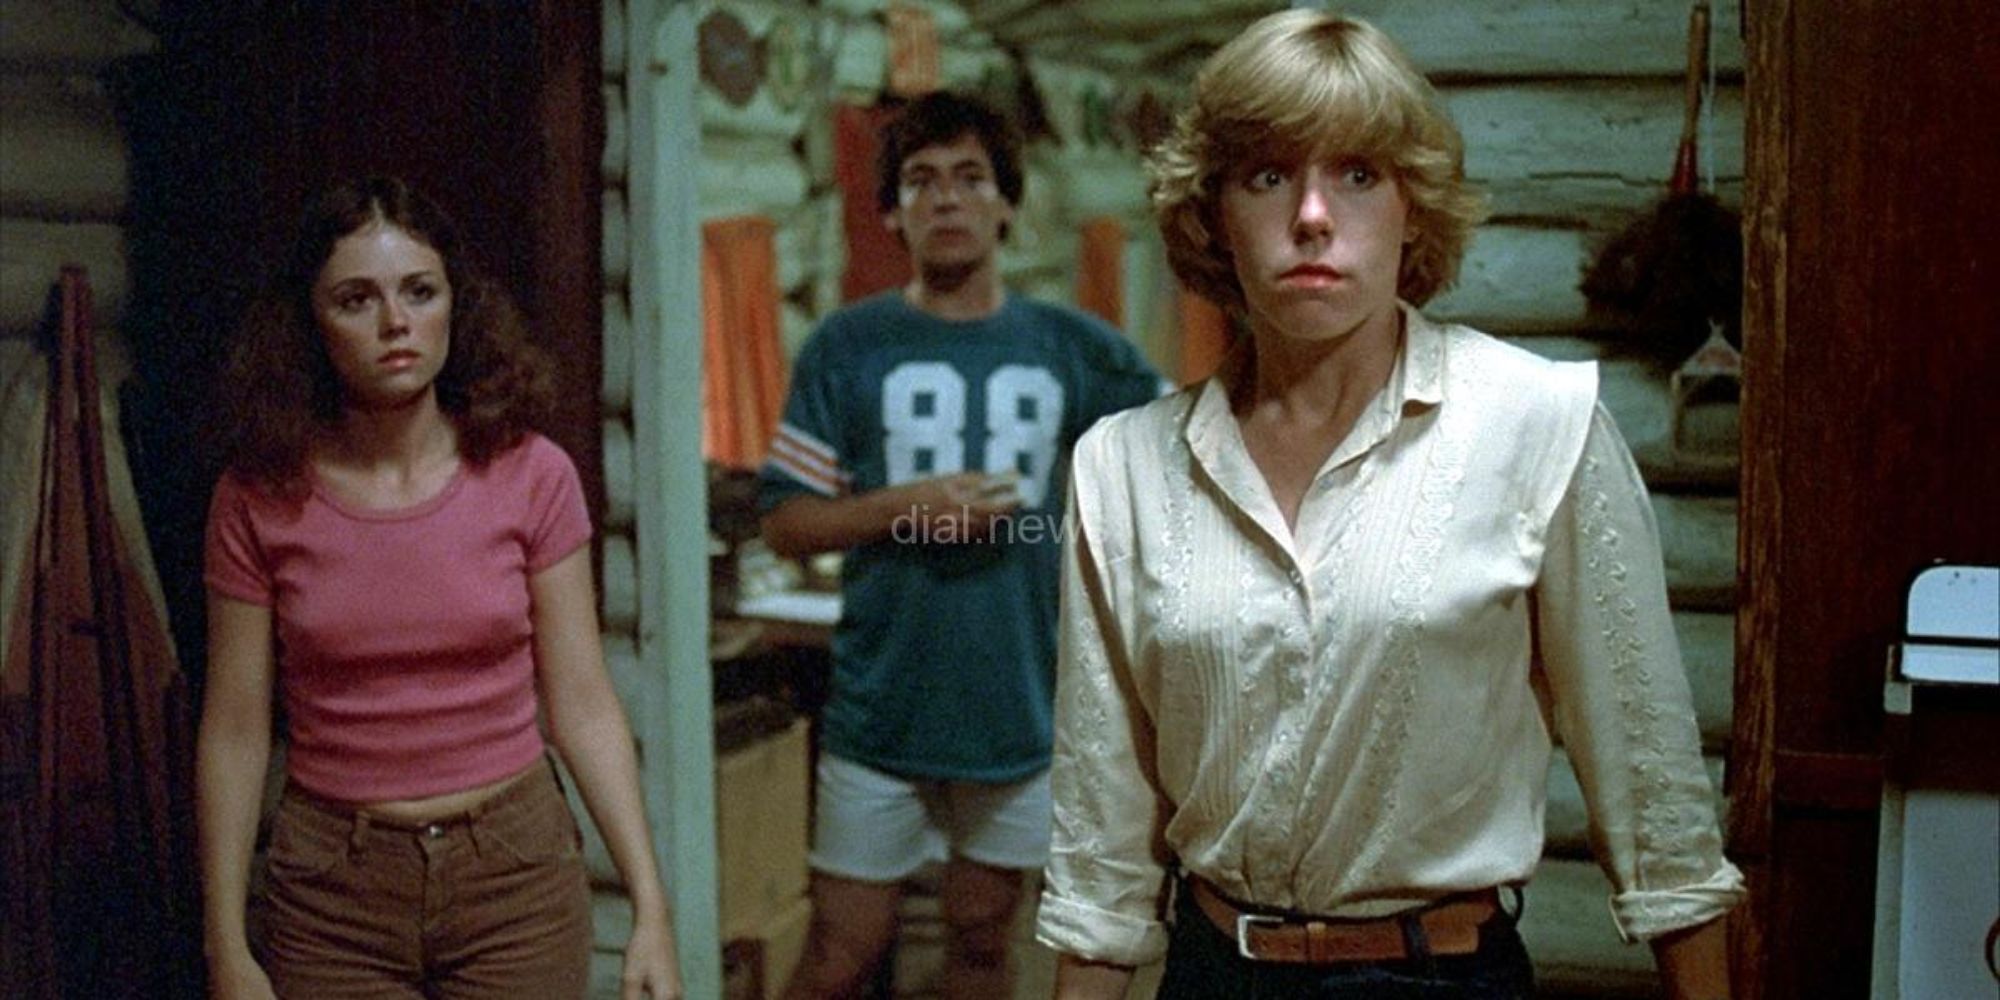 Three teens in a cabin in Friday the 13th